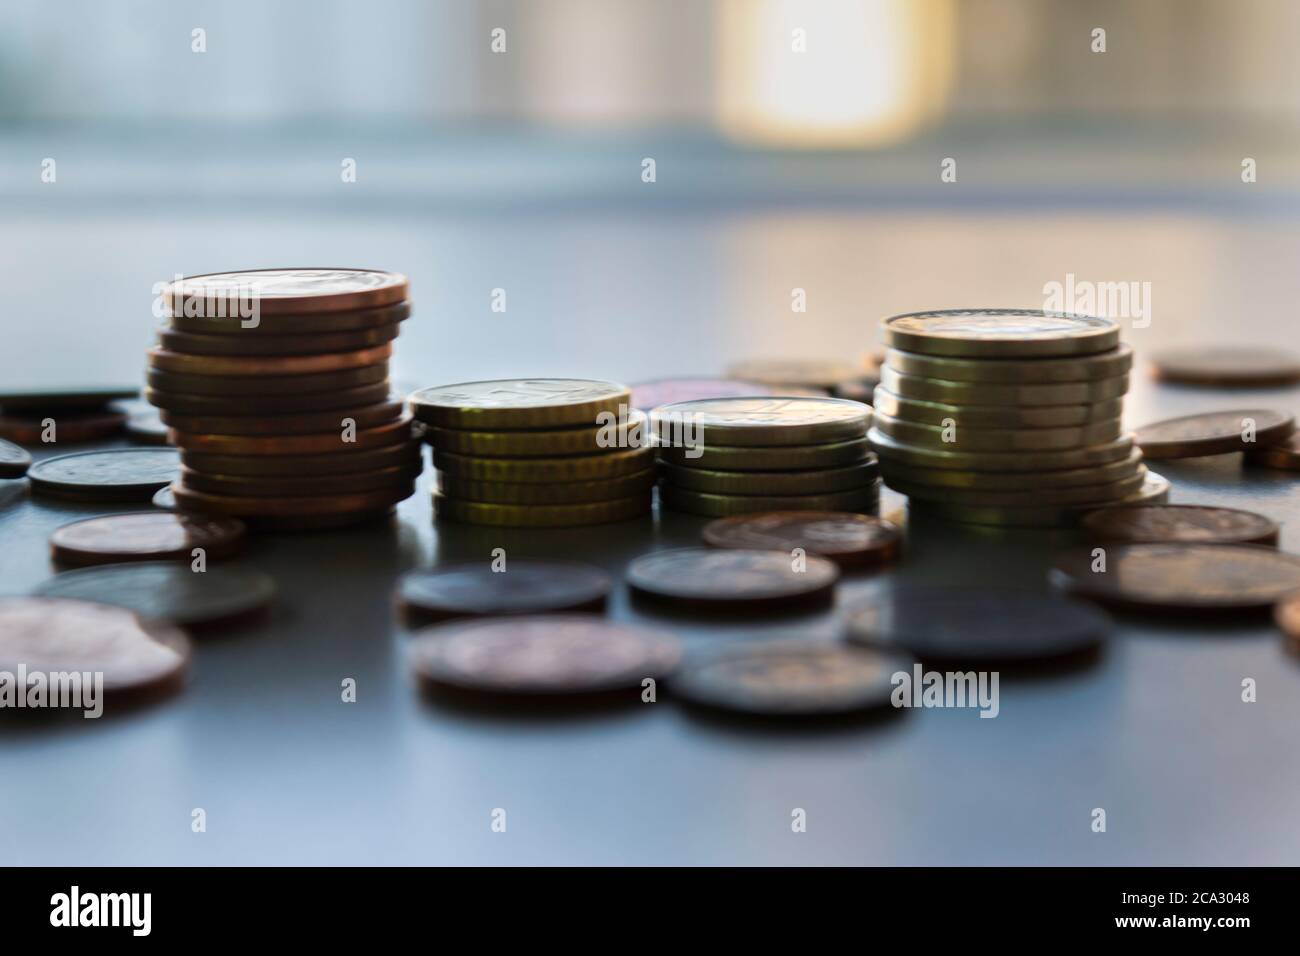 Euro and Europe Coins stacks,diferent sizes and colors.Saving money concept,business and banking..Blurred background Stock Photo